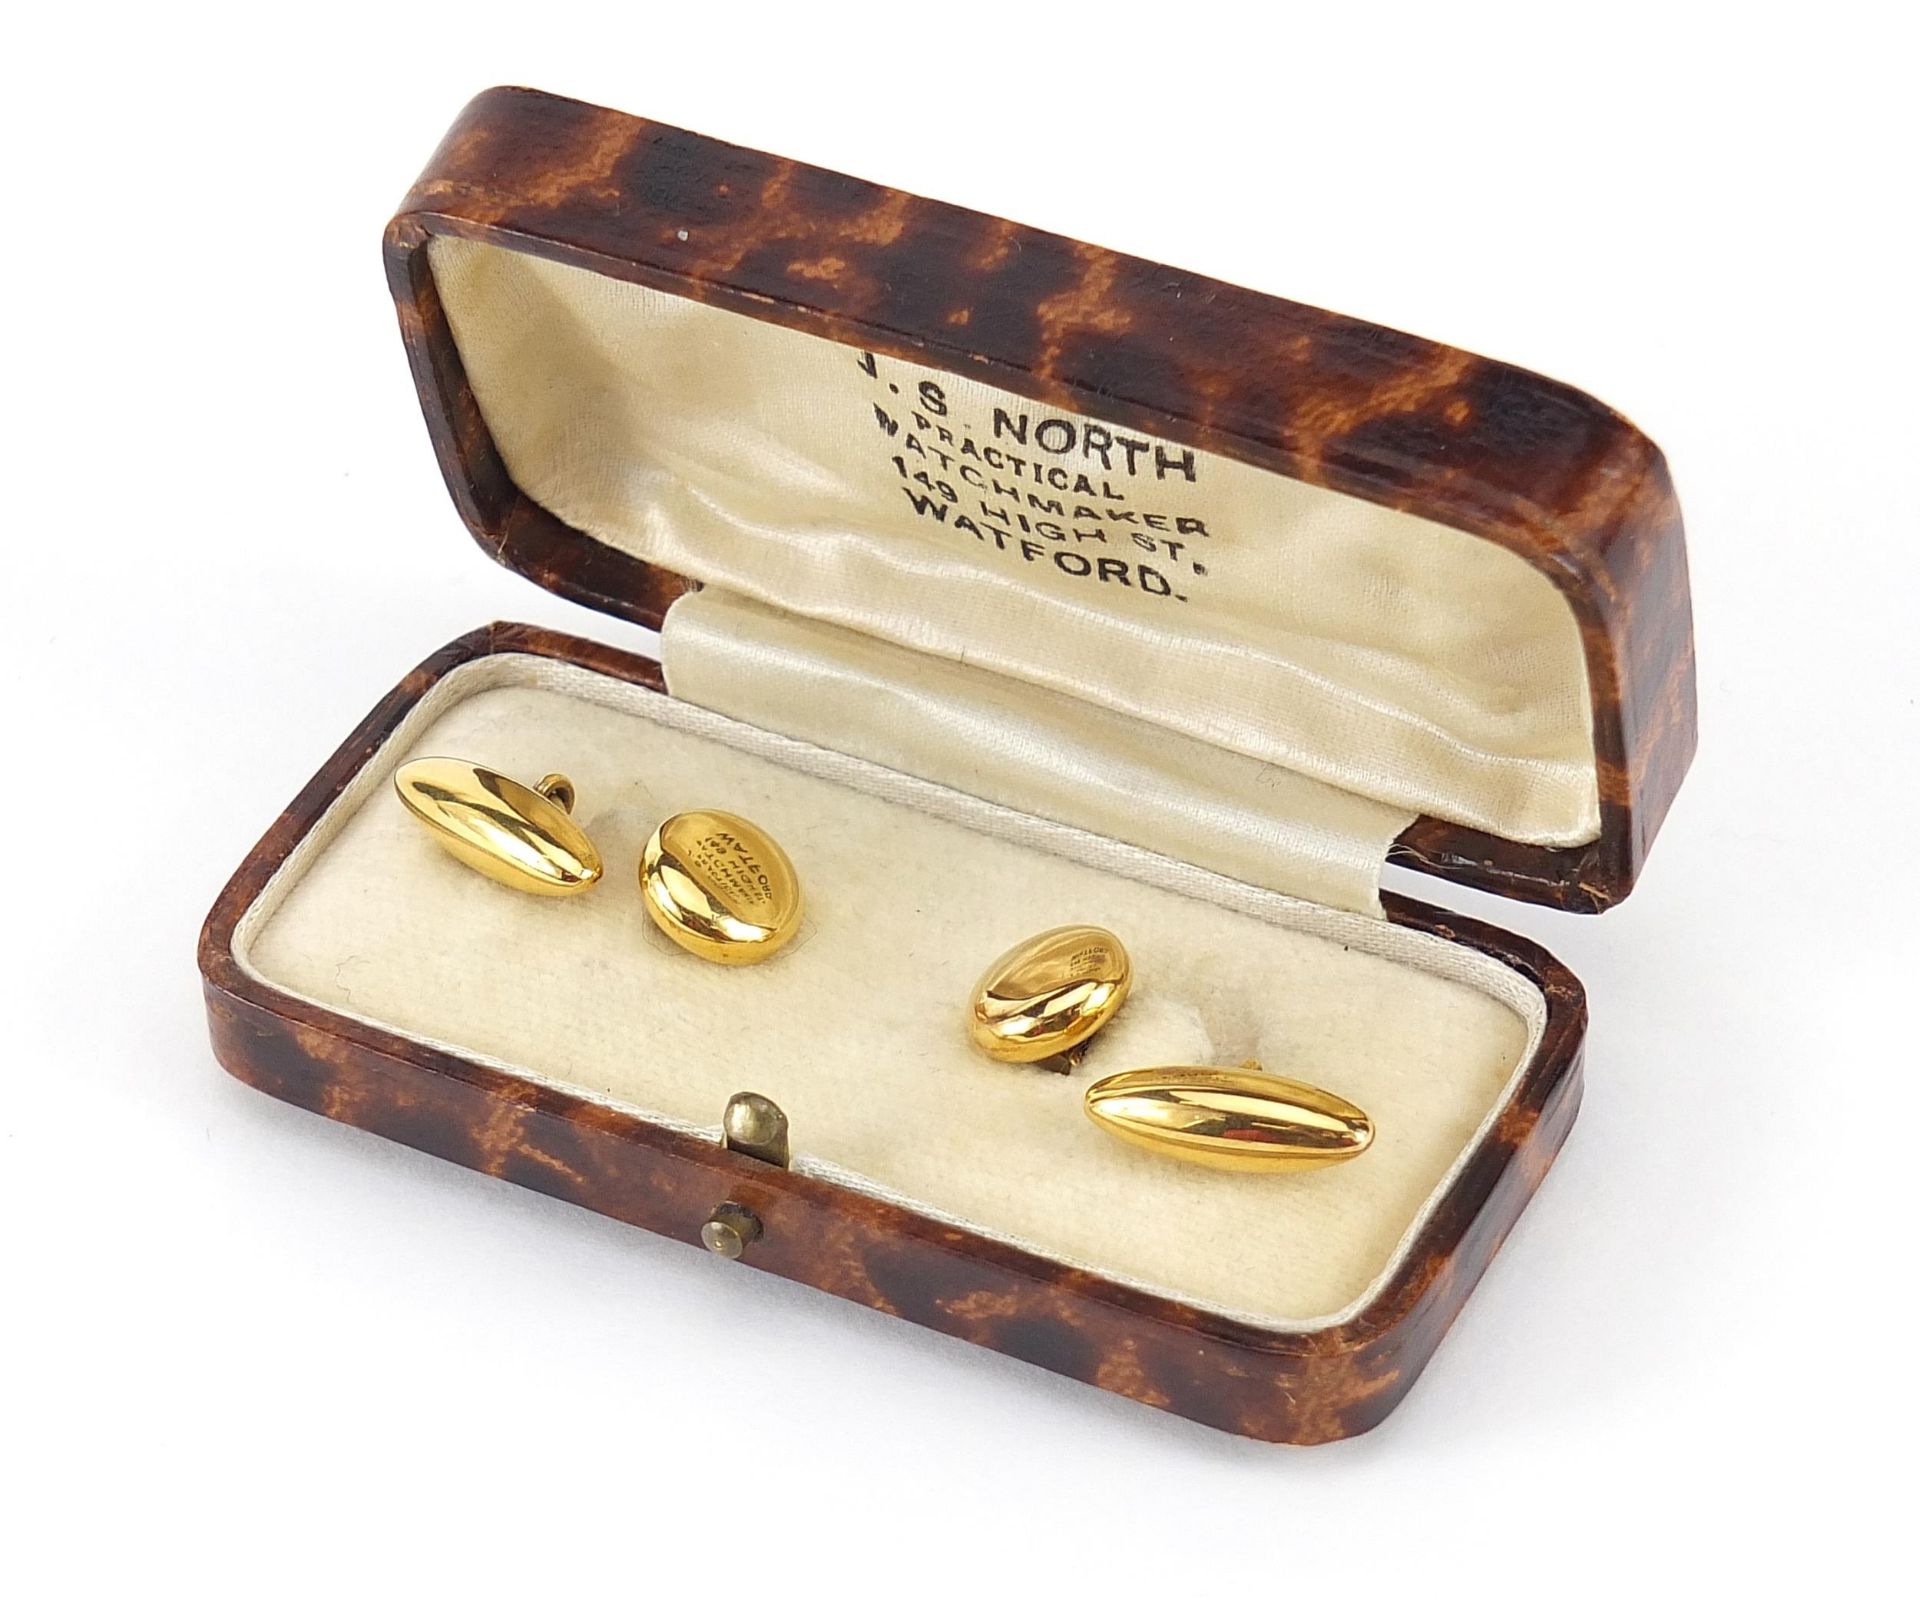 Pair of 10ct gold cufflinks housed in a J S North Watford fitted box, 1.7cm in length, 4.8g - Image 4 of 5